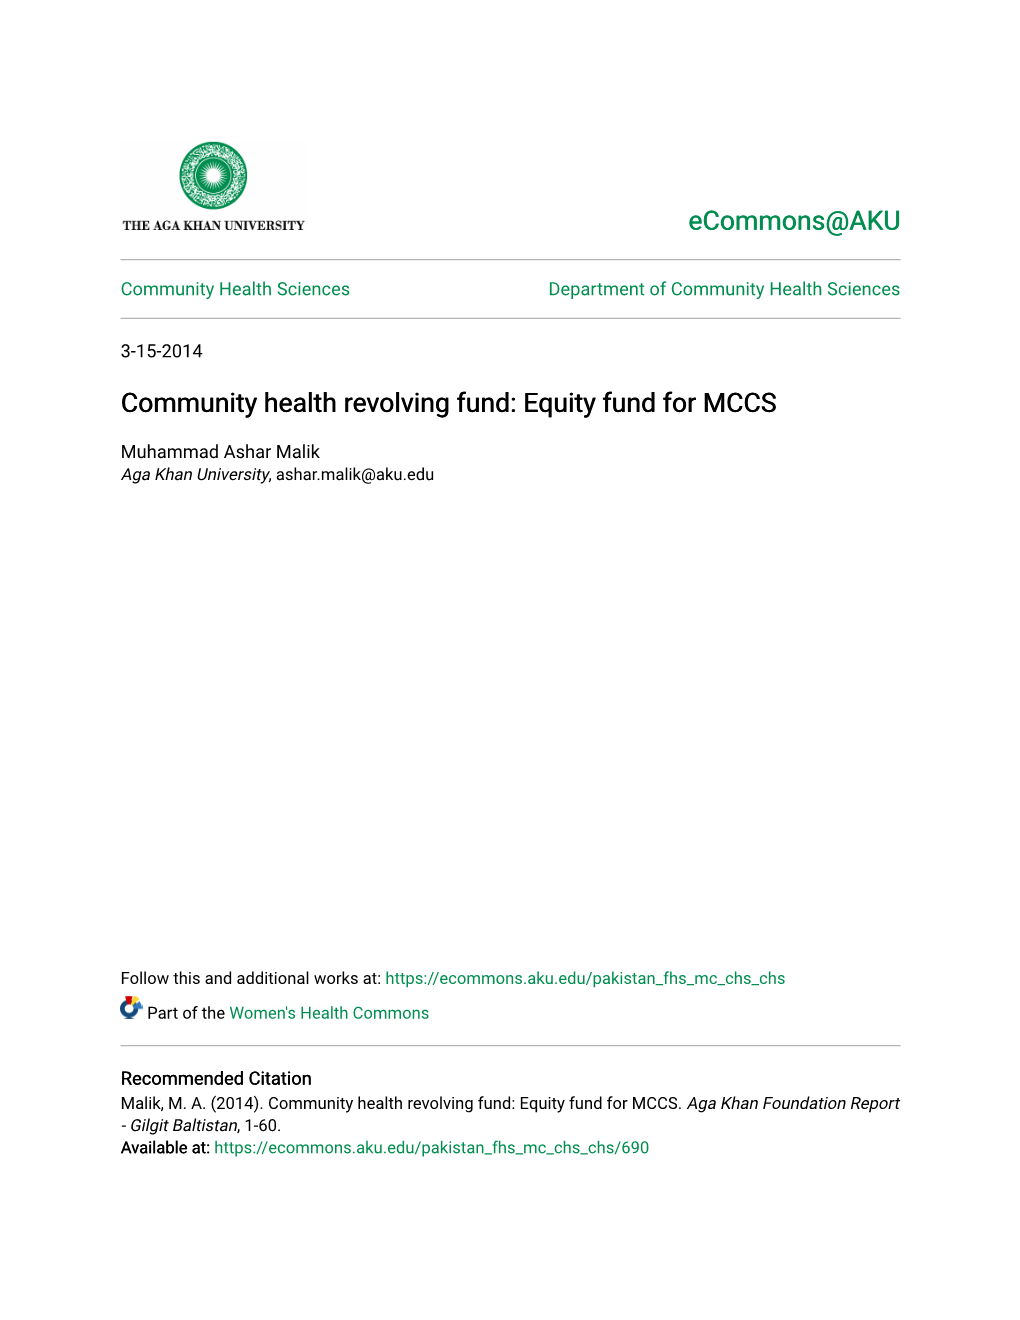 Community Health Revolving Fund: Equity Fund for MCCS